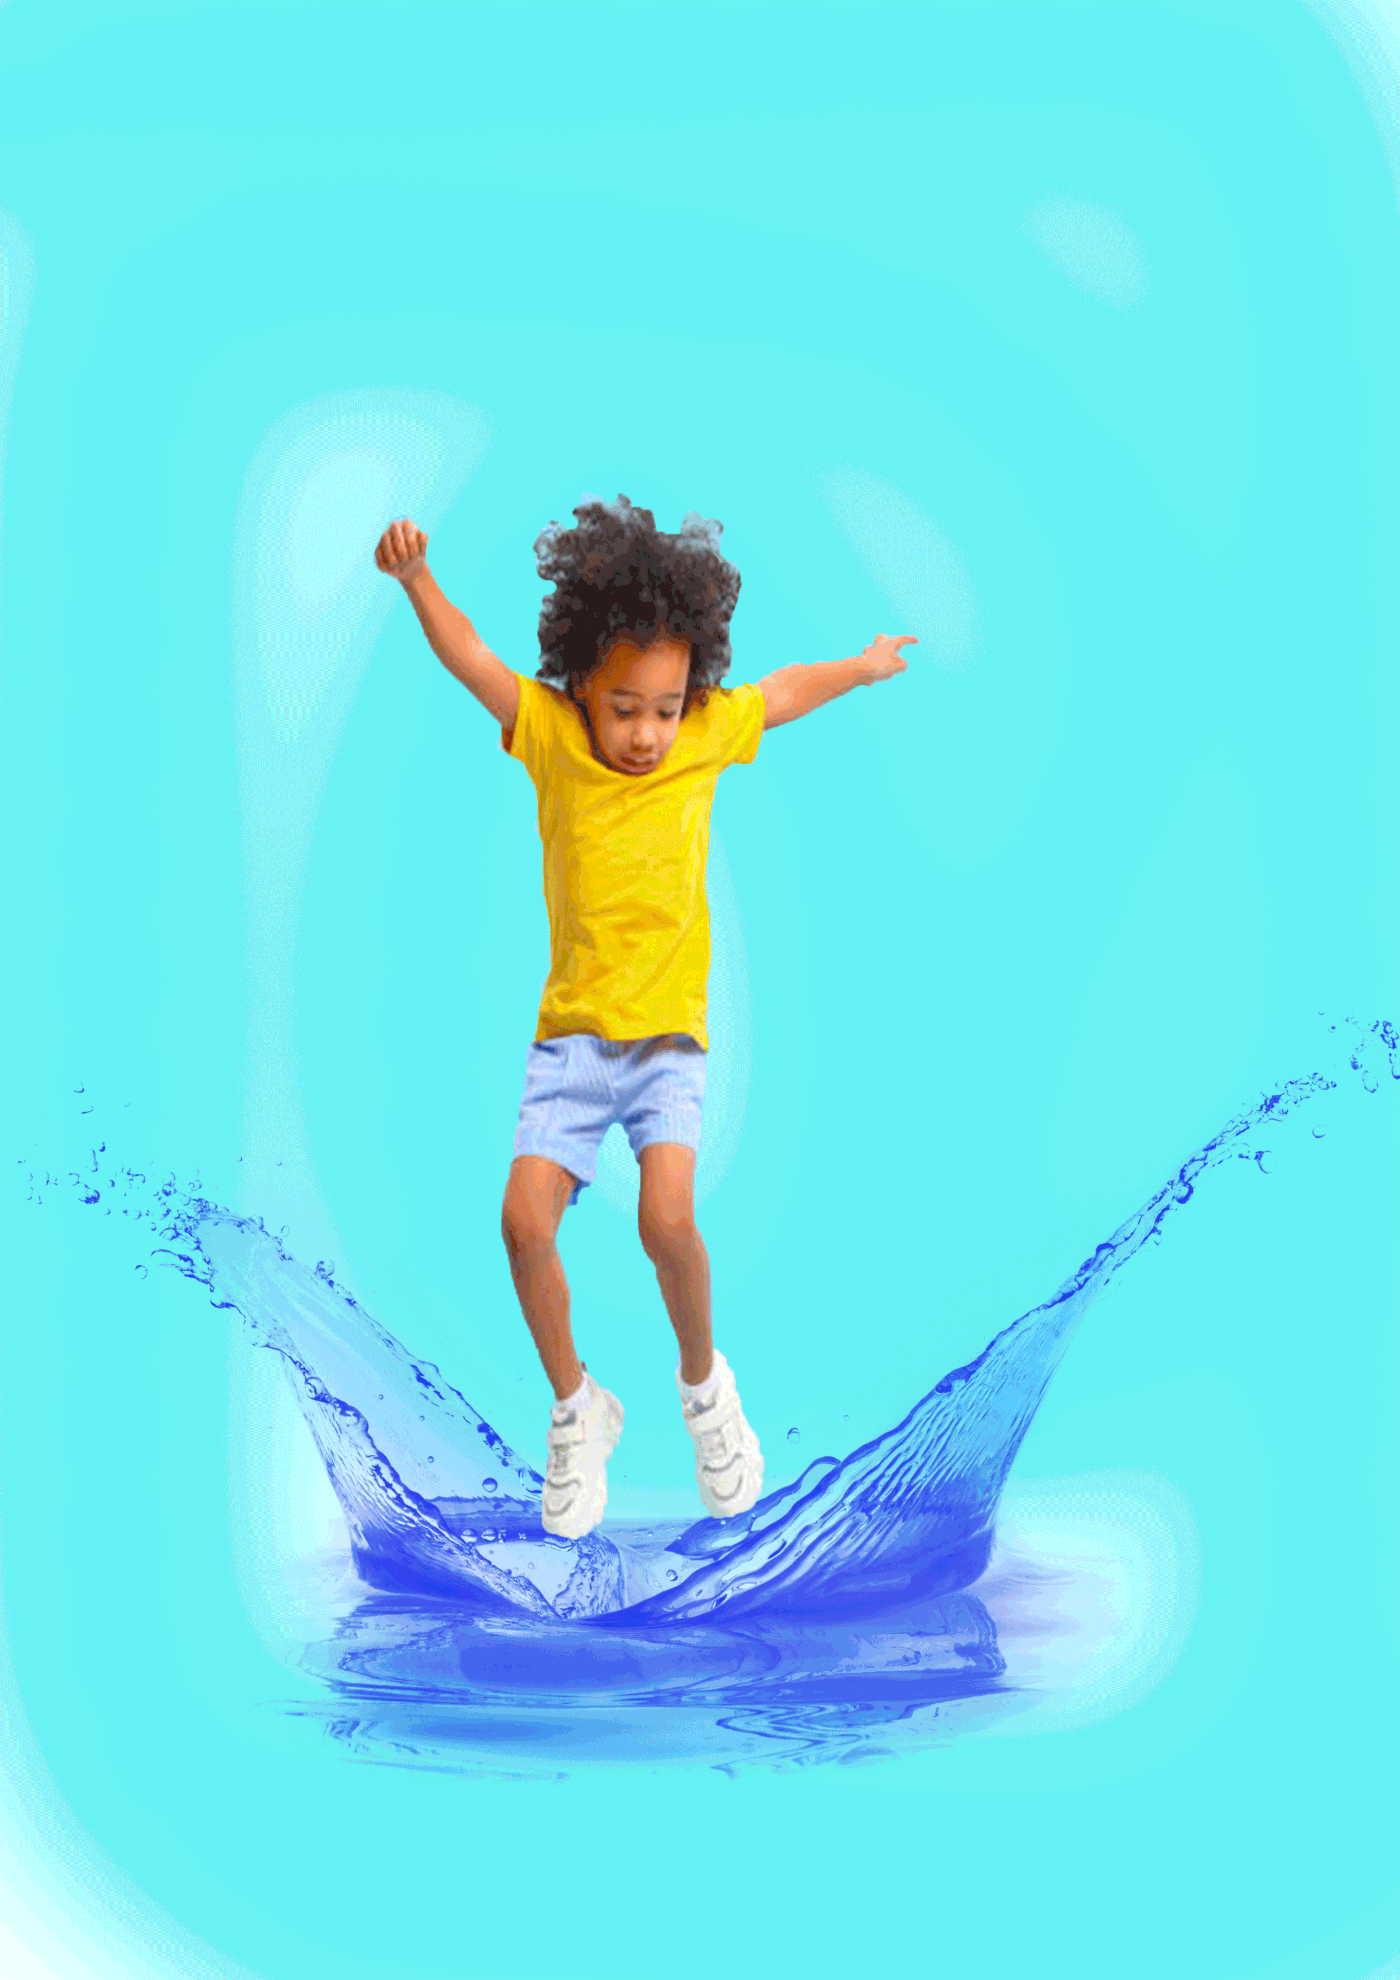 Water Effect jumping boy Editing  JUMPING WATER EFFECT